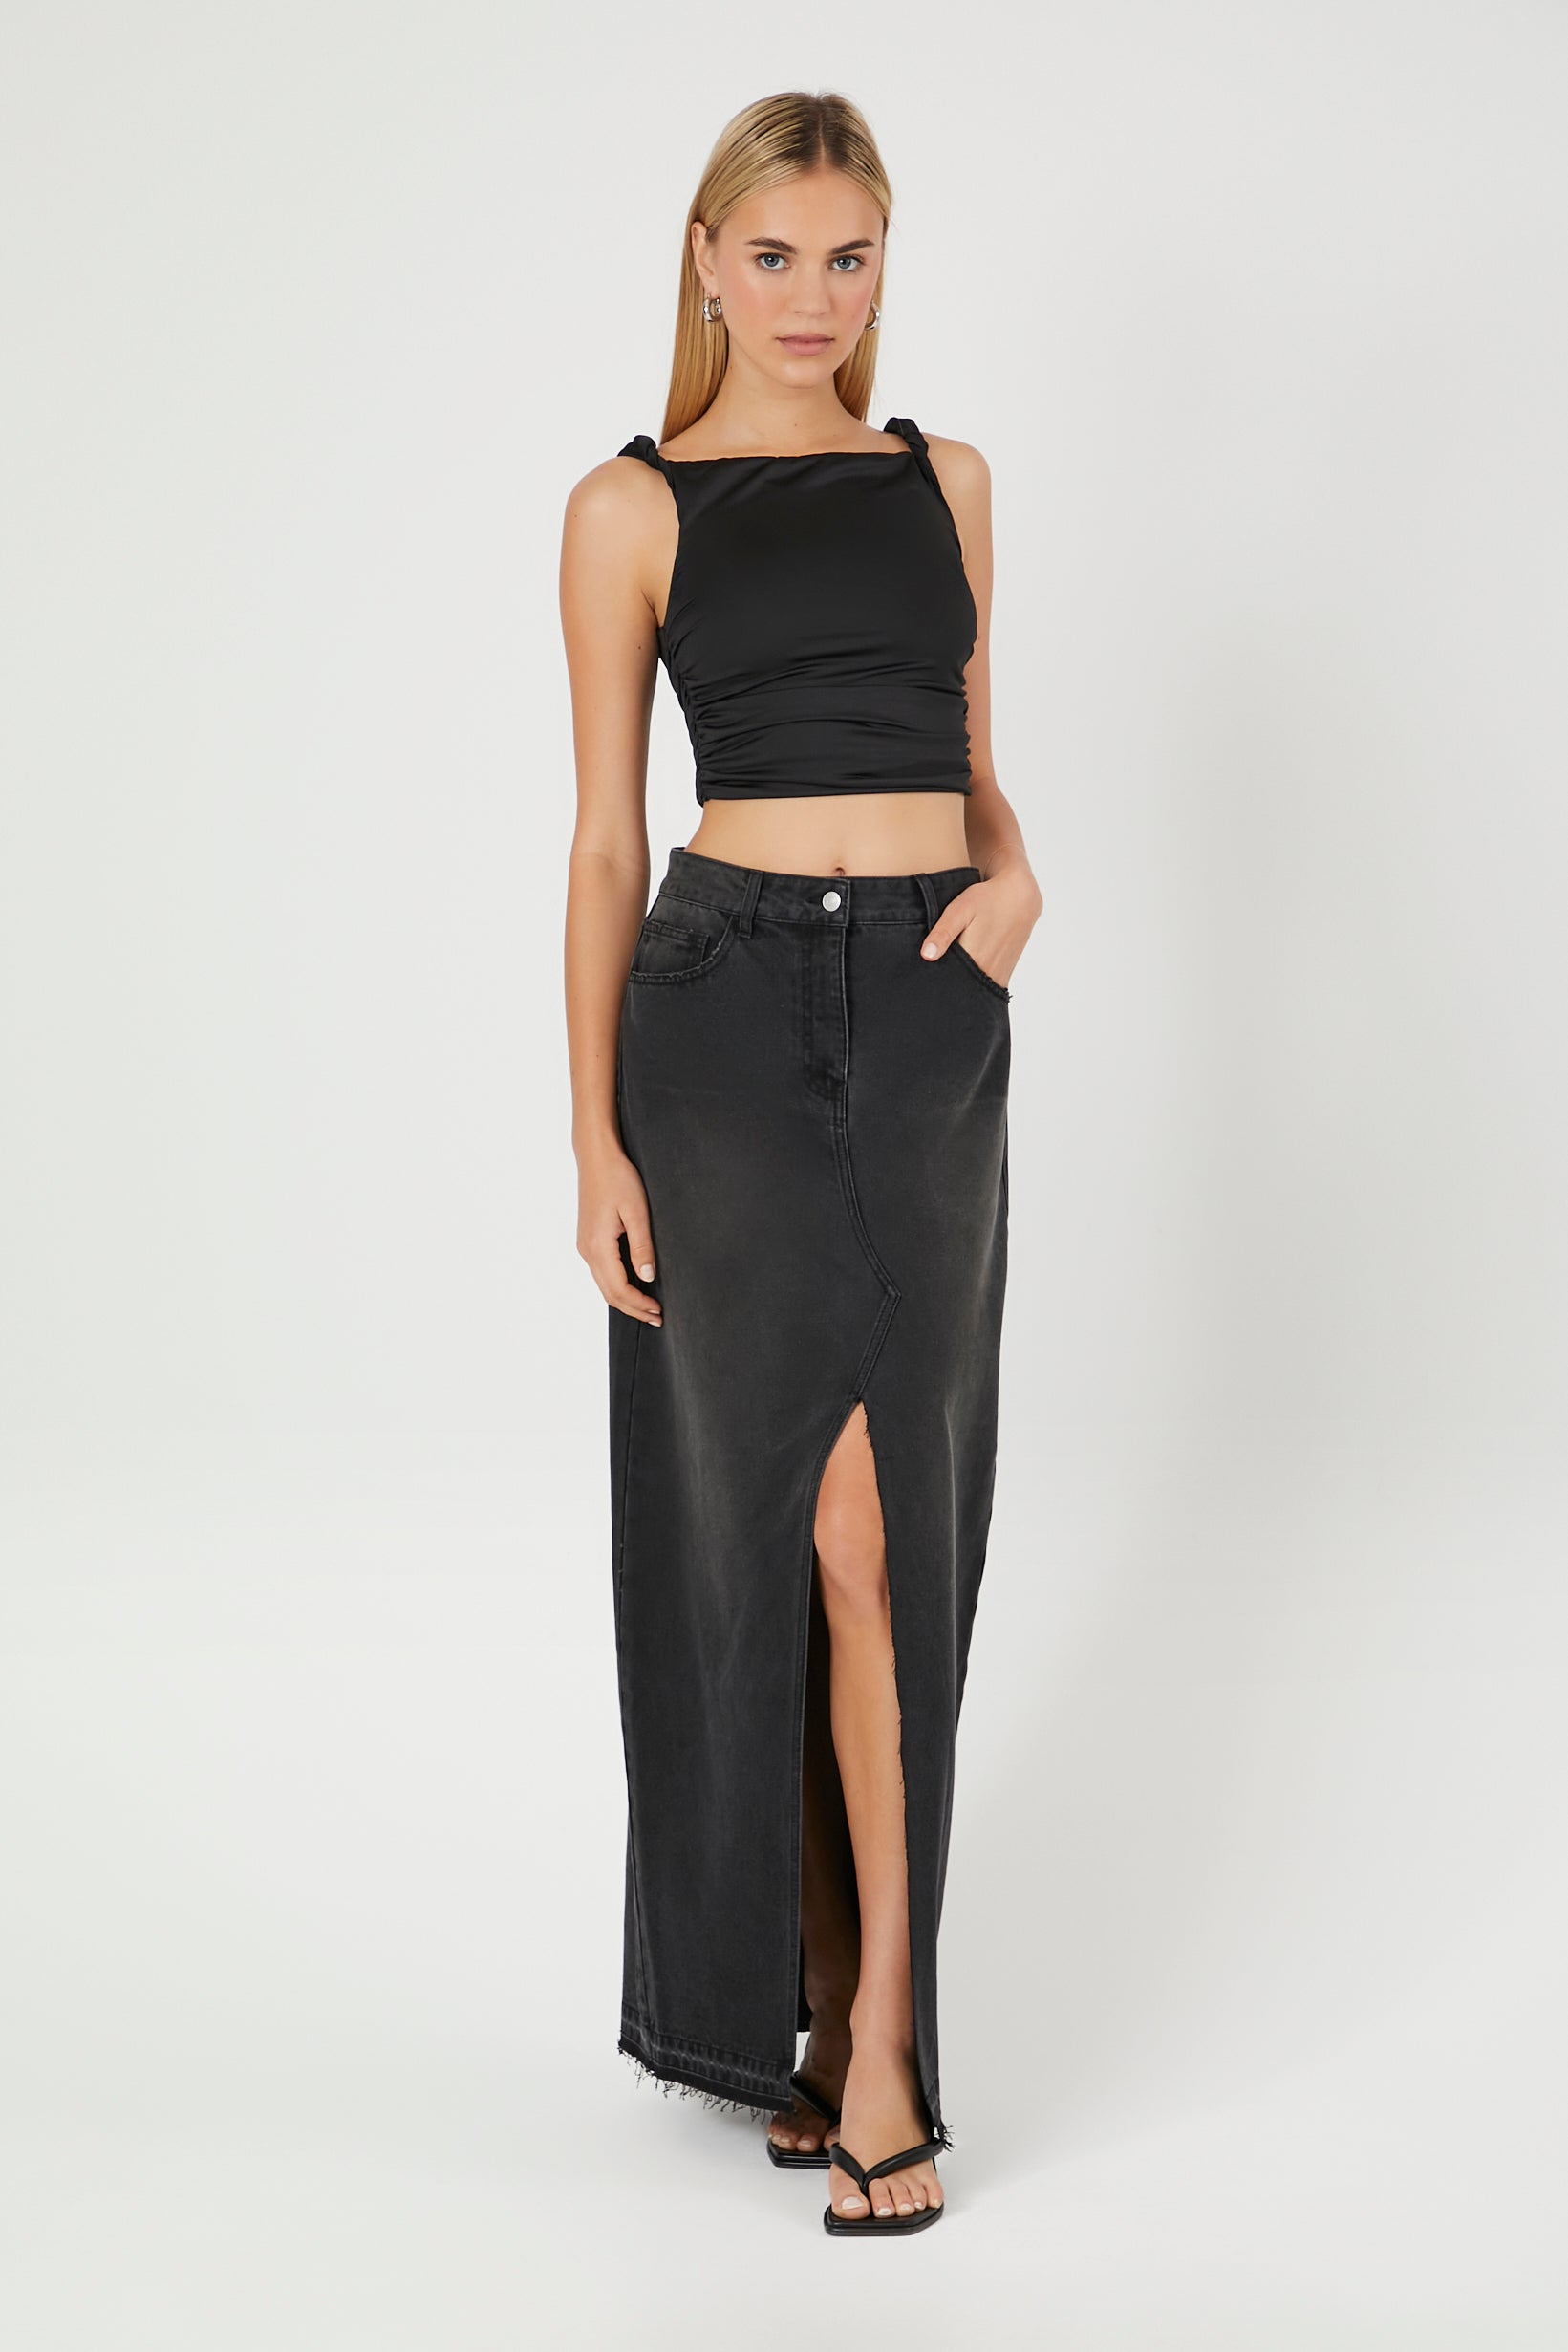 Black Knotted Crop Top 3